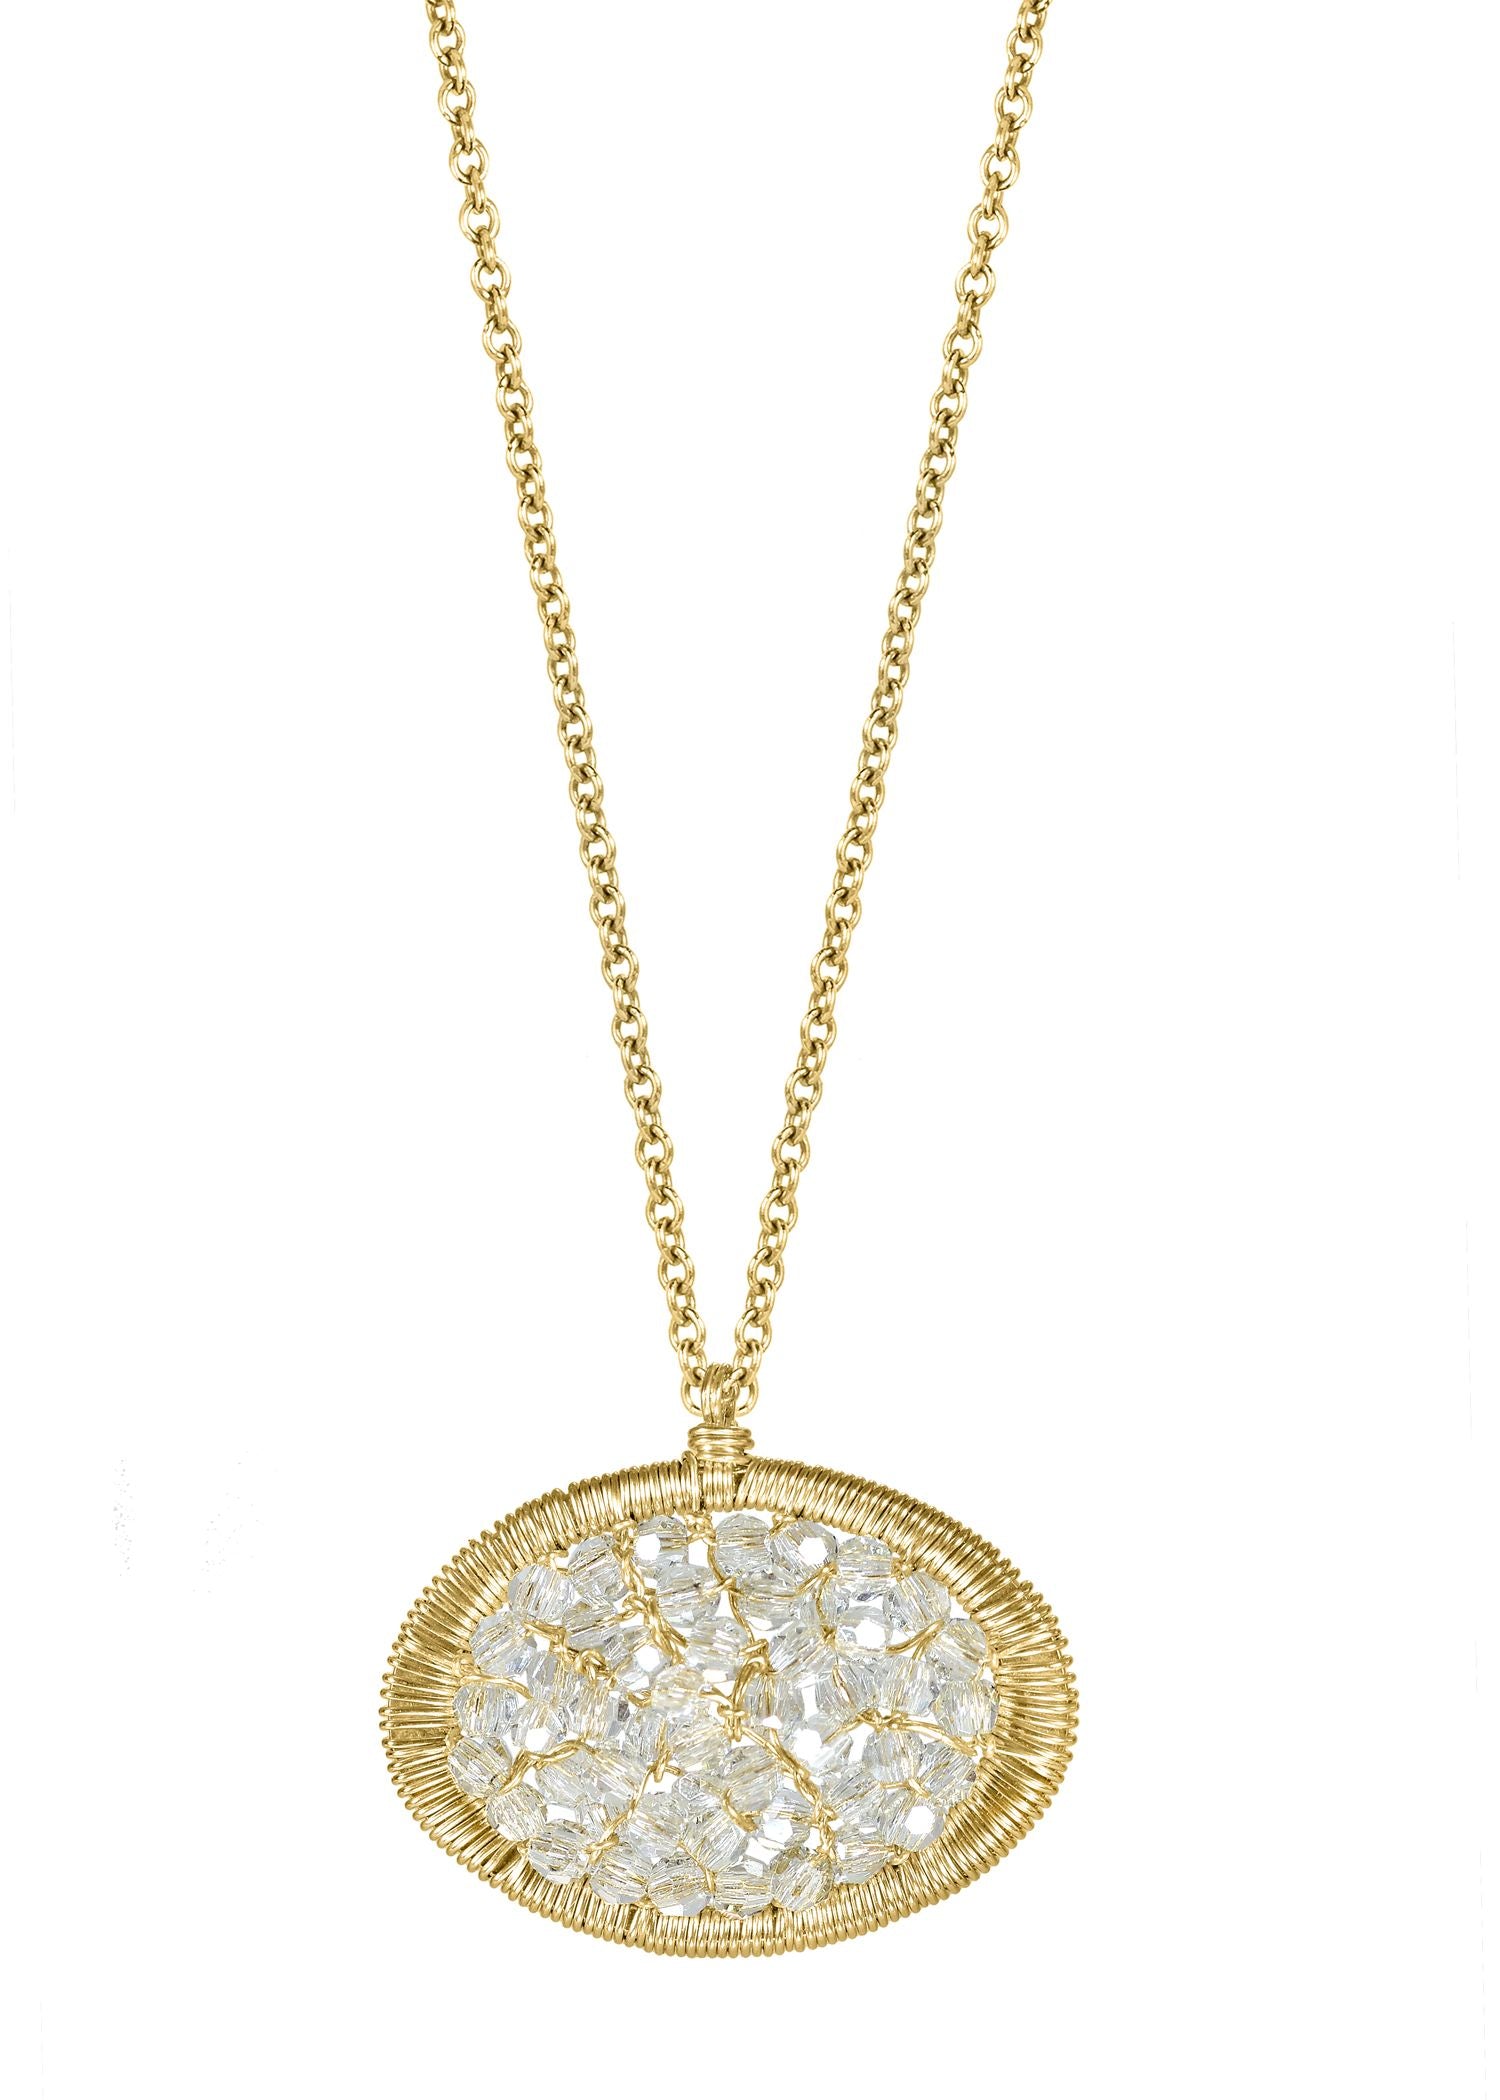 Crystal 14k gold fill Necklace measures 16” in length Pendant measures 9/16” in length and 3/4” in width Handmade in our Los Angeles studio